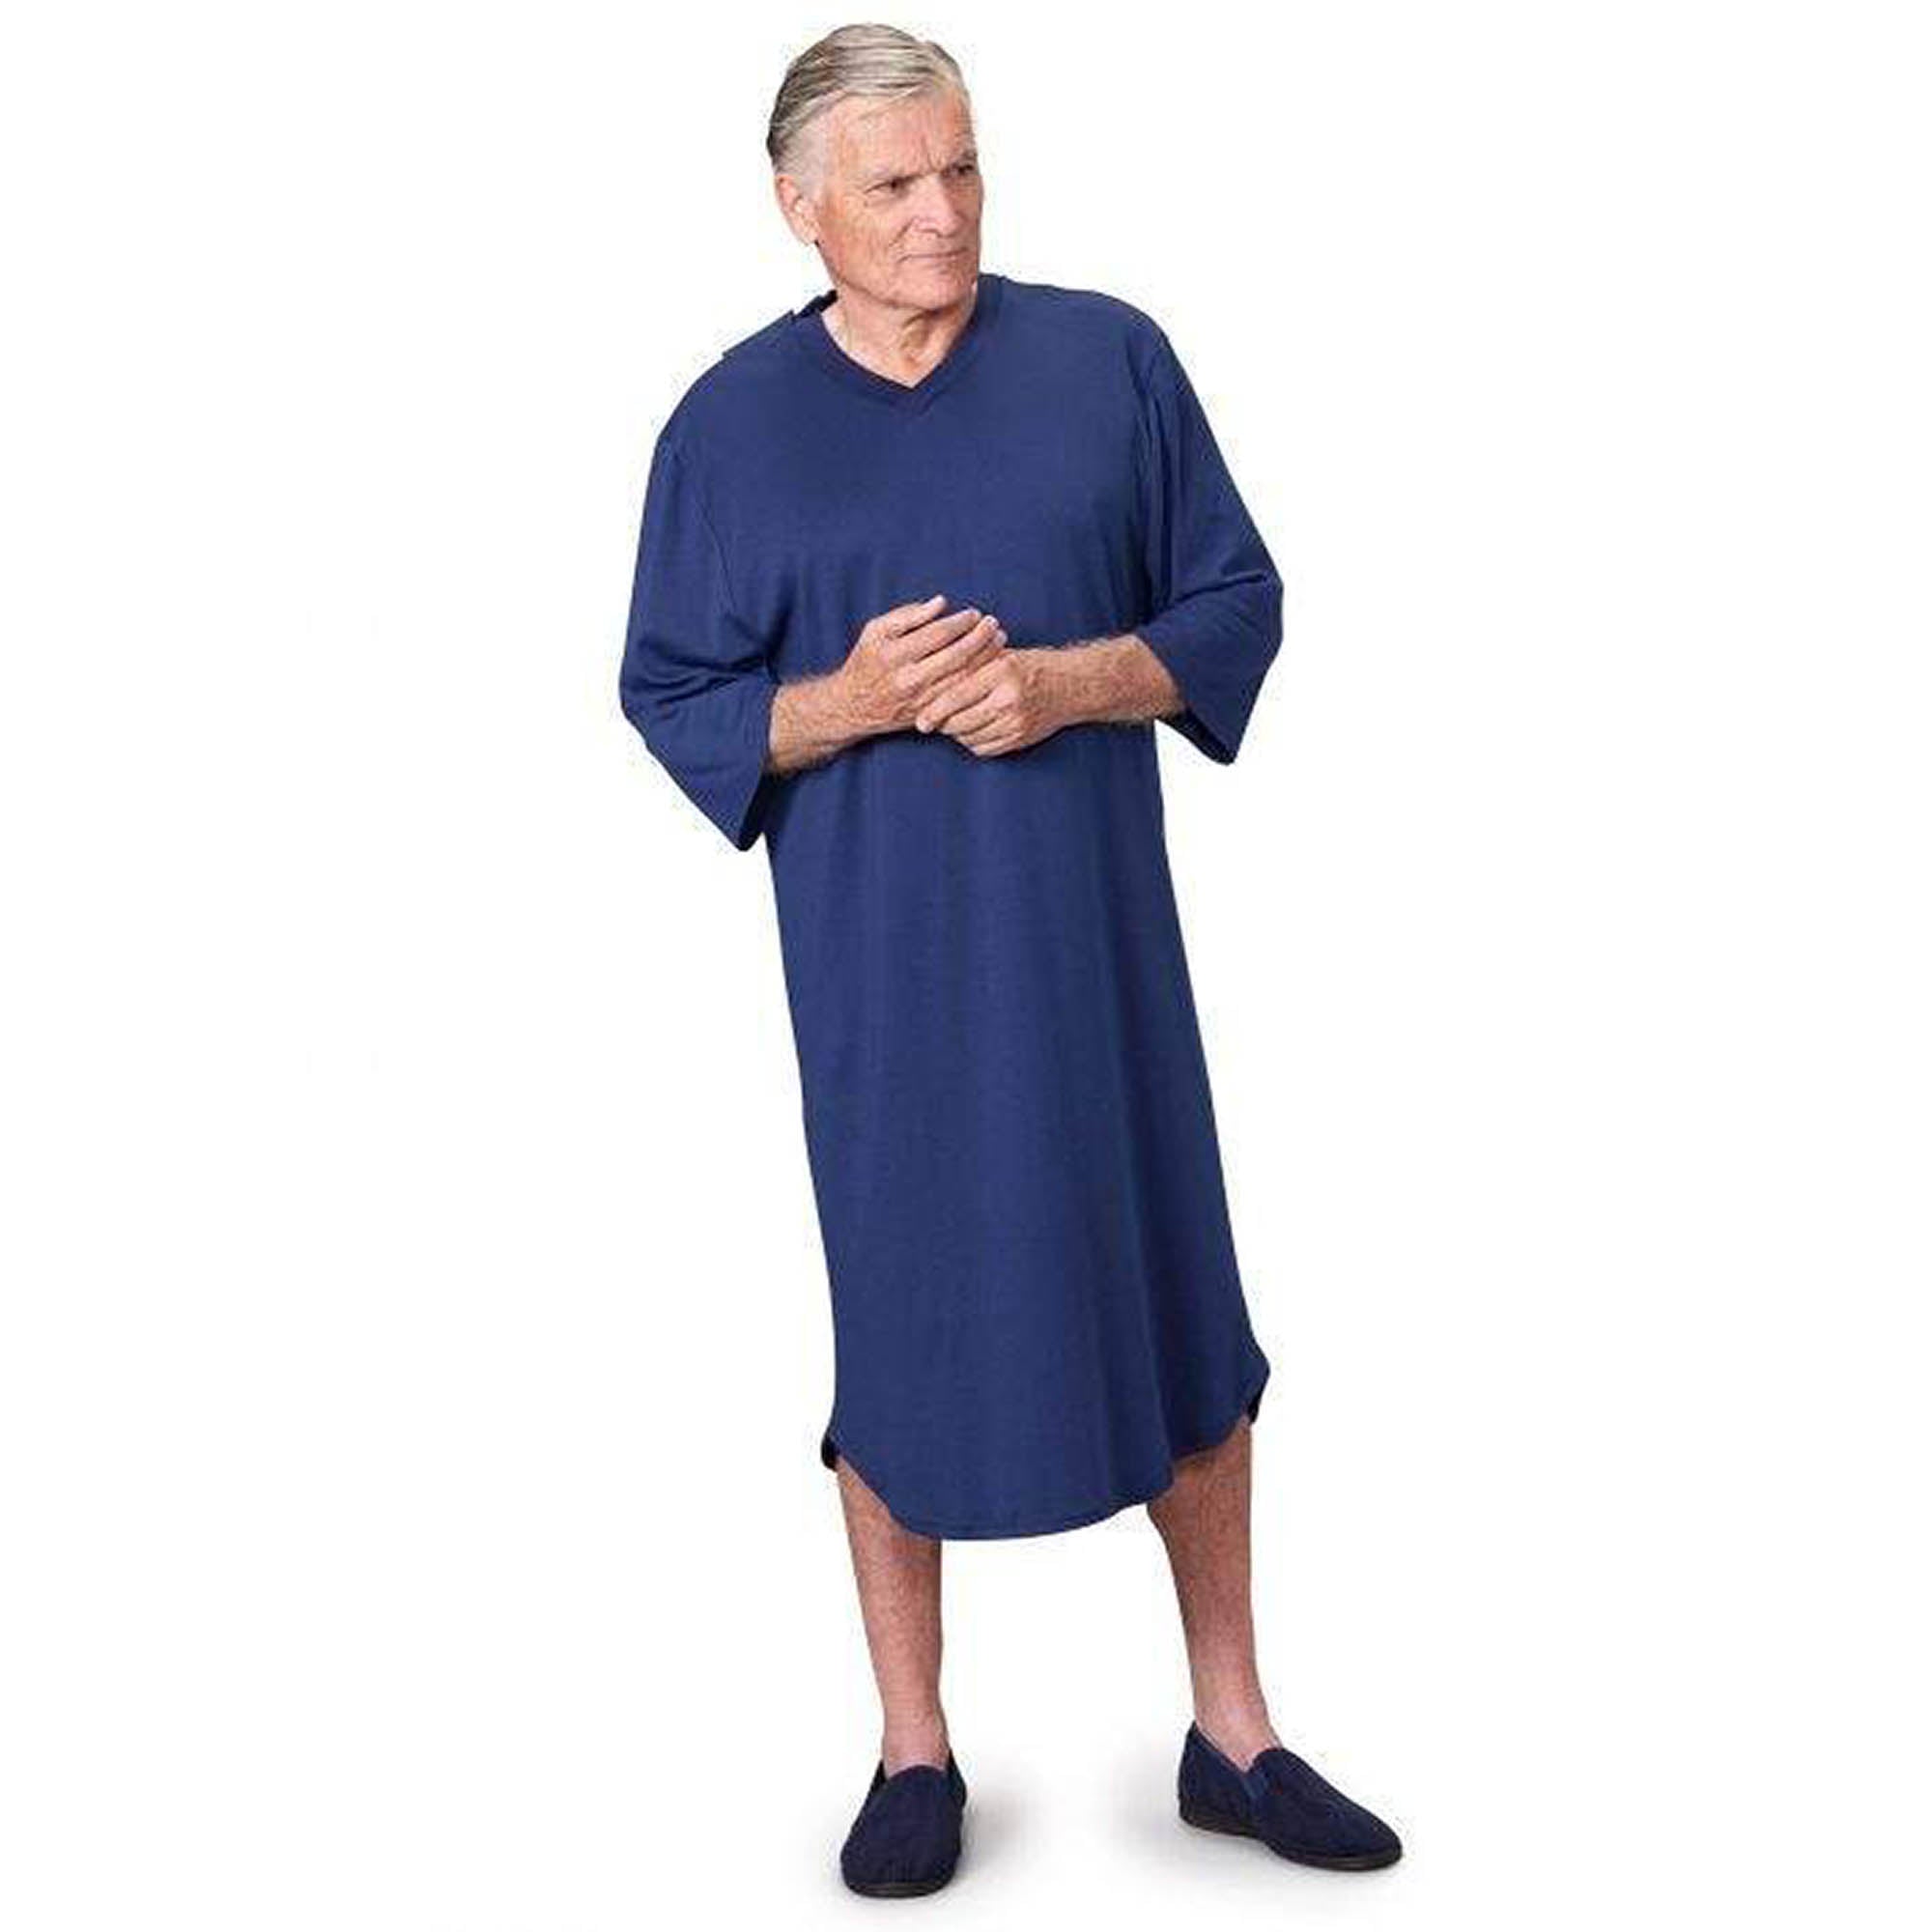 Silverts Men's Open Back Antimicrobial Nightgown - Royal - M